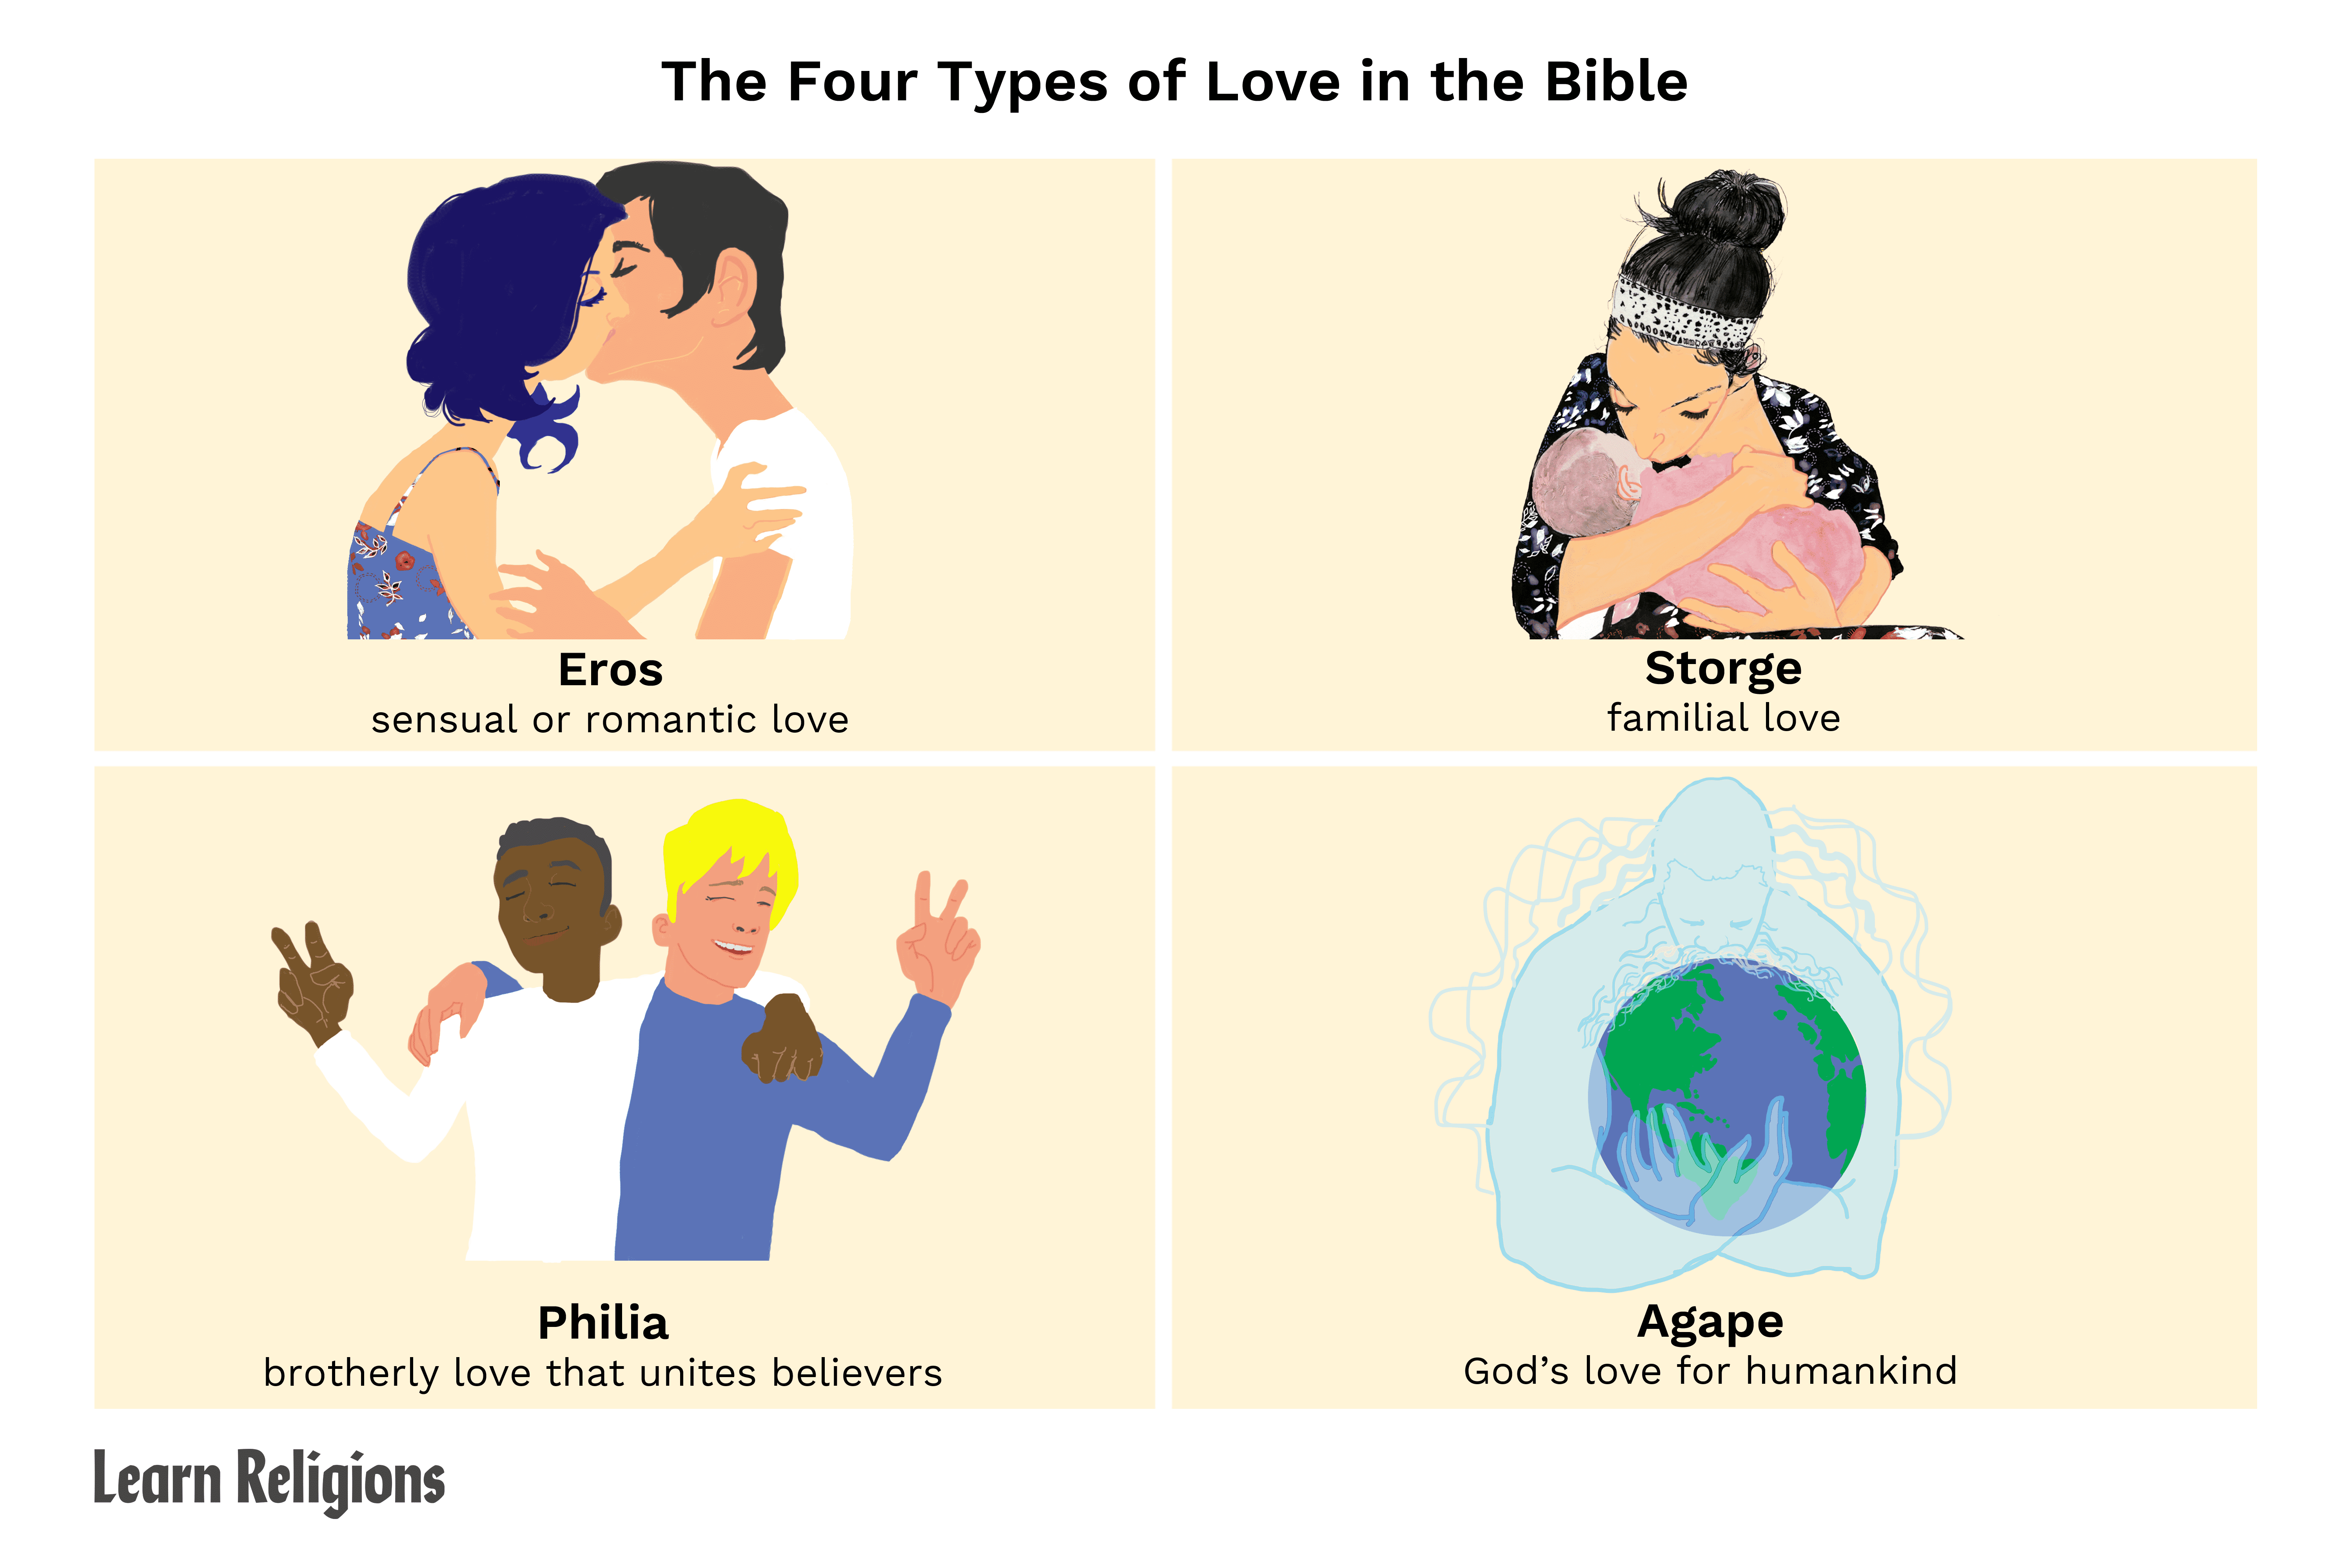 What are the 4 types of love in the Bible?